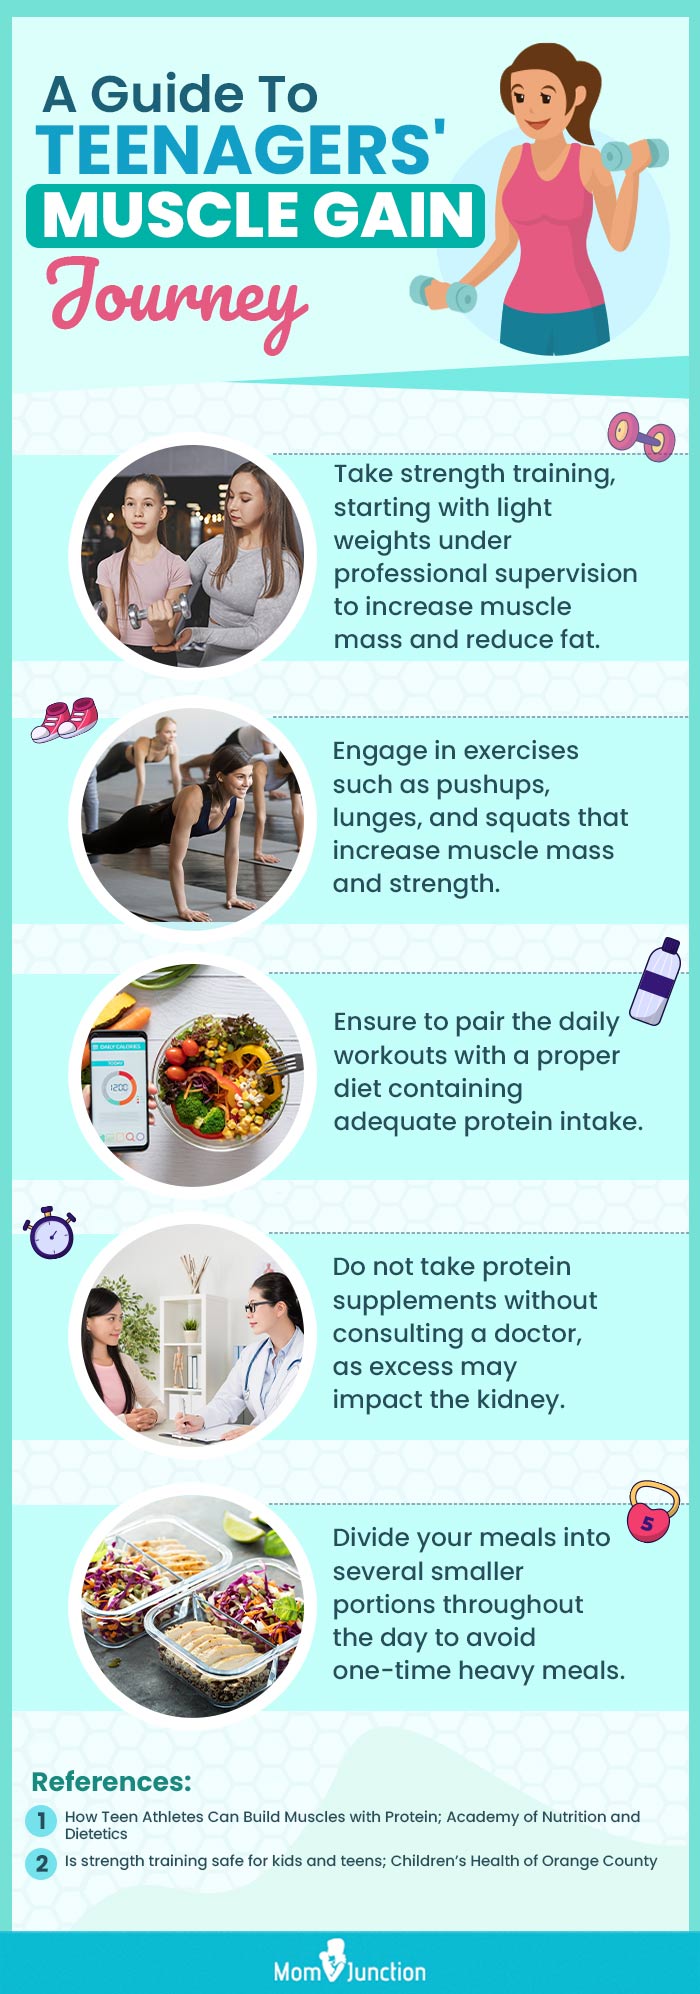 a guide to teenagers muscle gain journey (infographic)